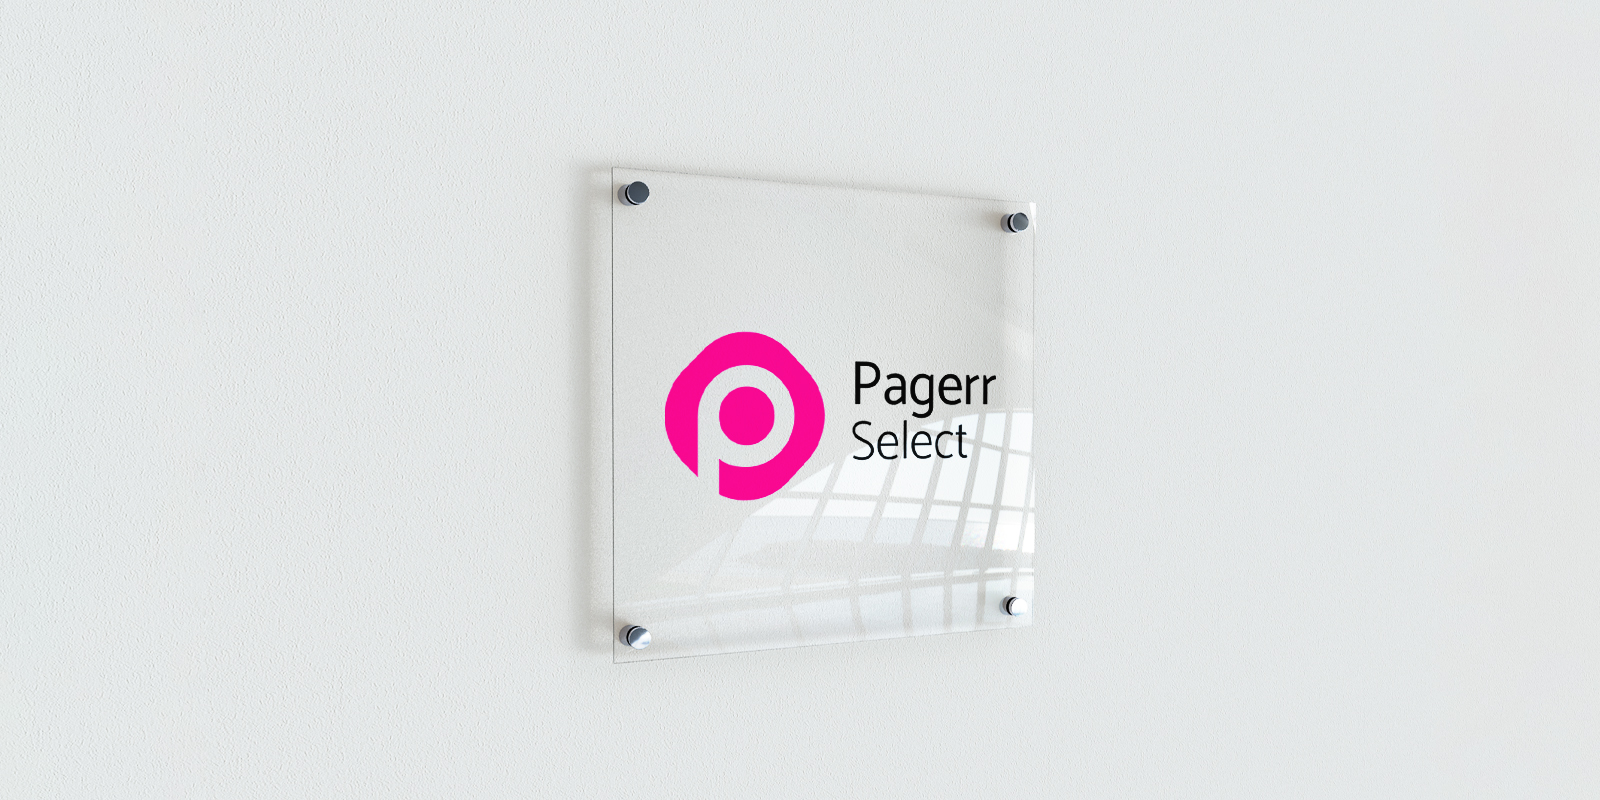 Acrylic signs in Valencia - Print with Pagerr